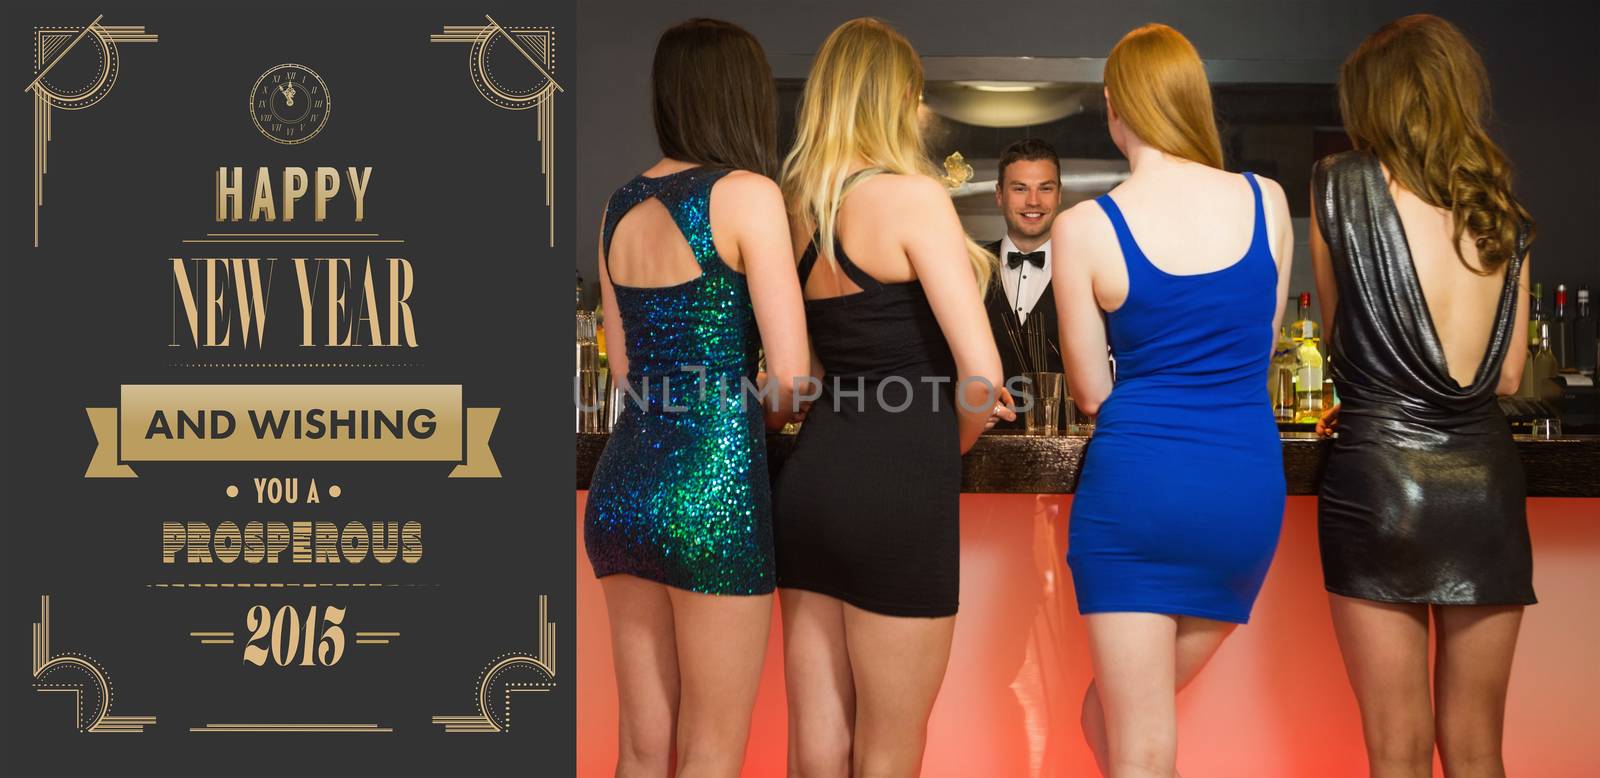 Attractive friends ordering drinks against art deco new year greeting